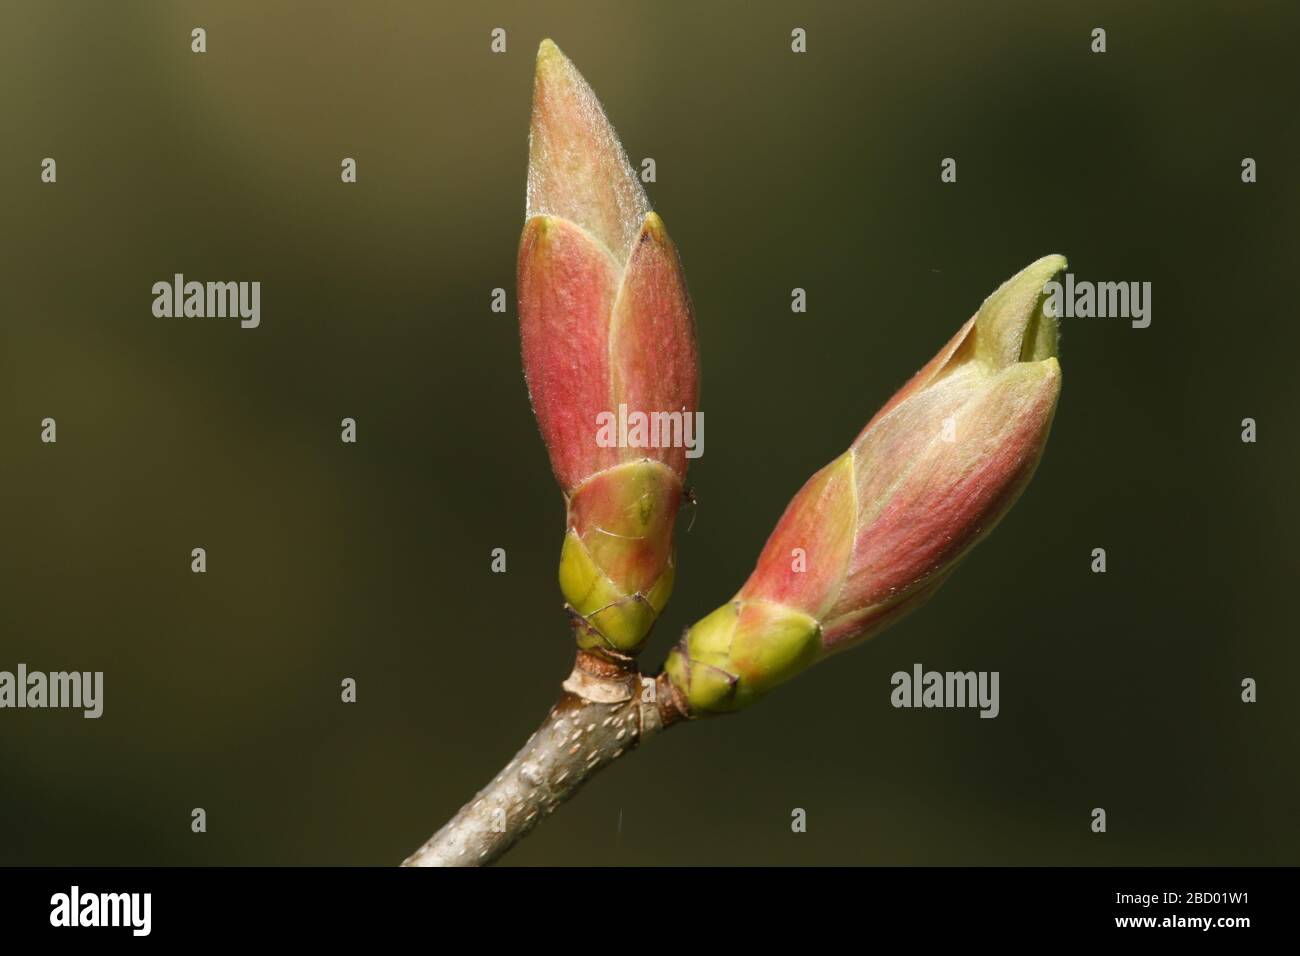 Buds growing on a branch of a Sycamore tree, Acer pseudoplatanus, in spring. Stock Photo